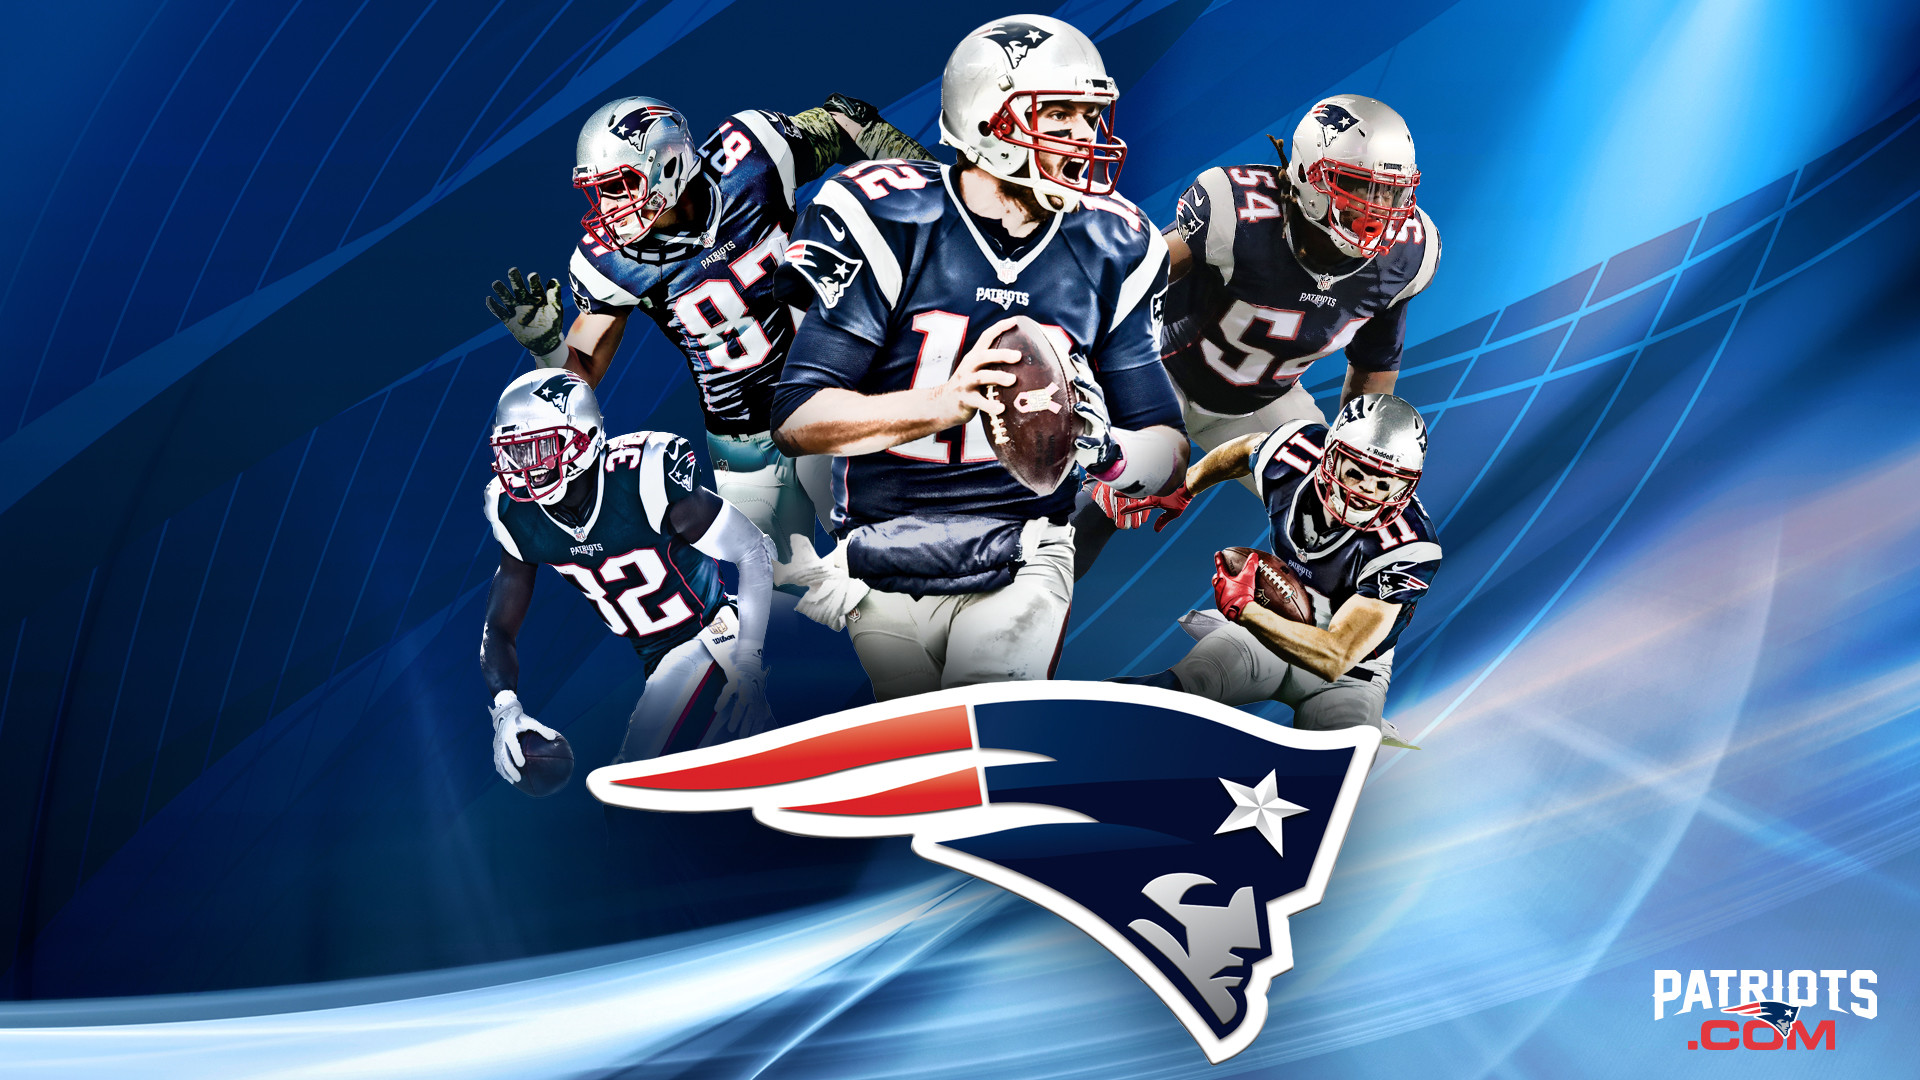 nfl wallpaper,super bowl,team,player,competition event,games